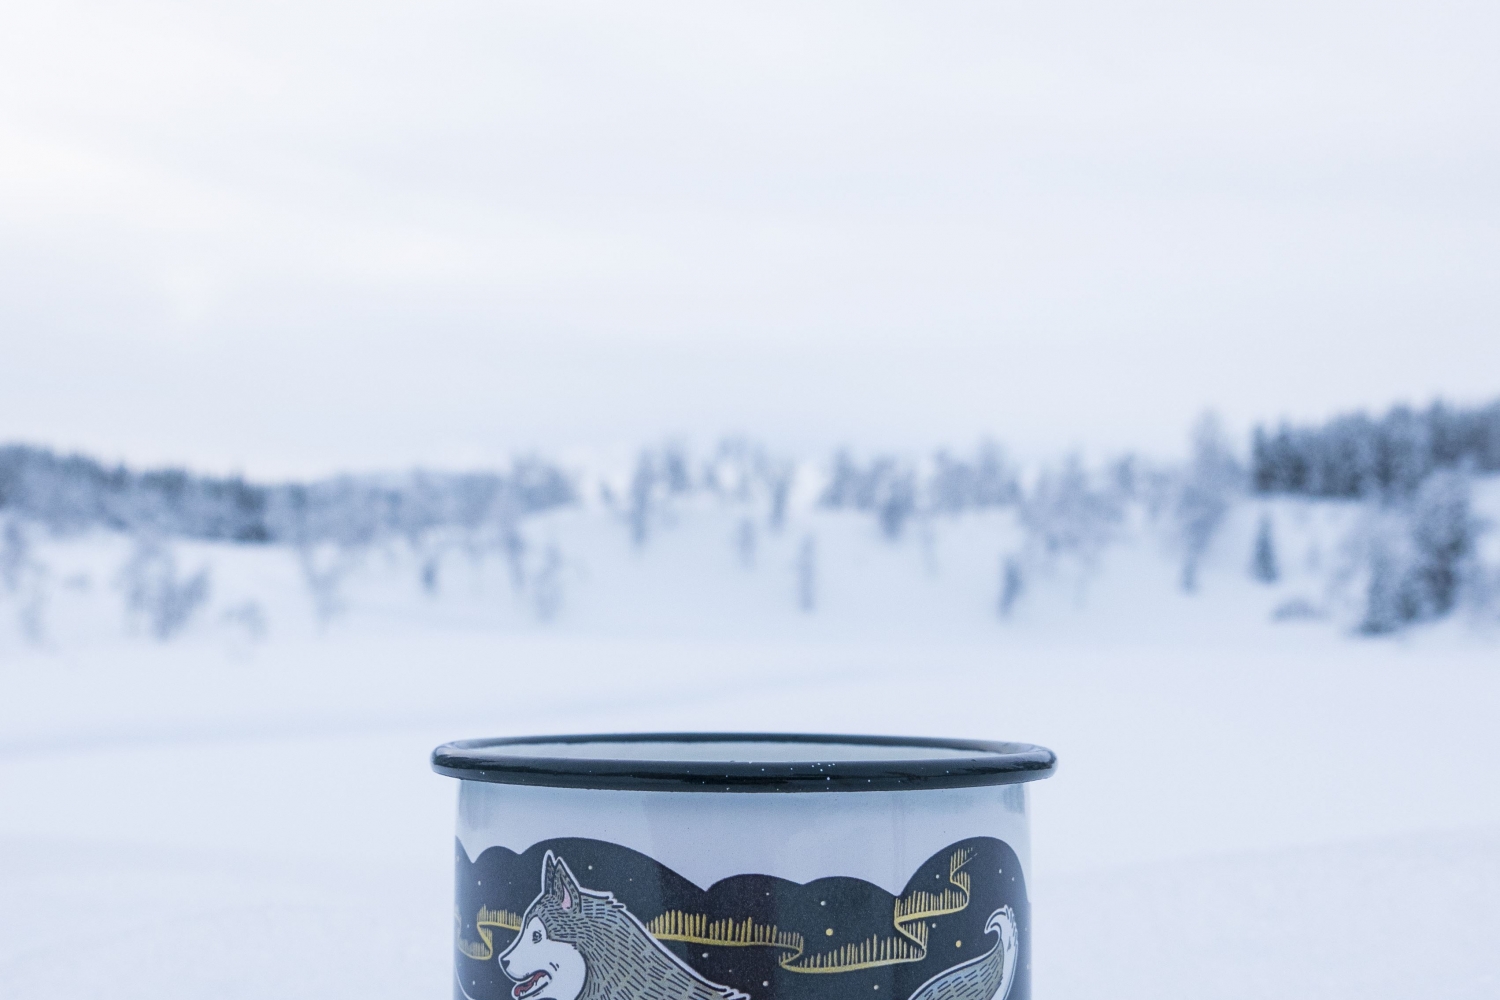 Enamel cup with husky and Northern Lights design